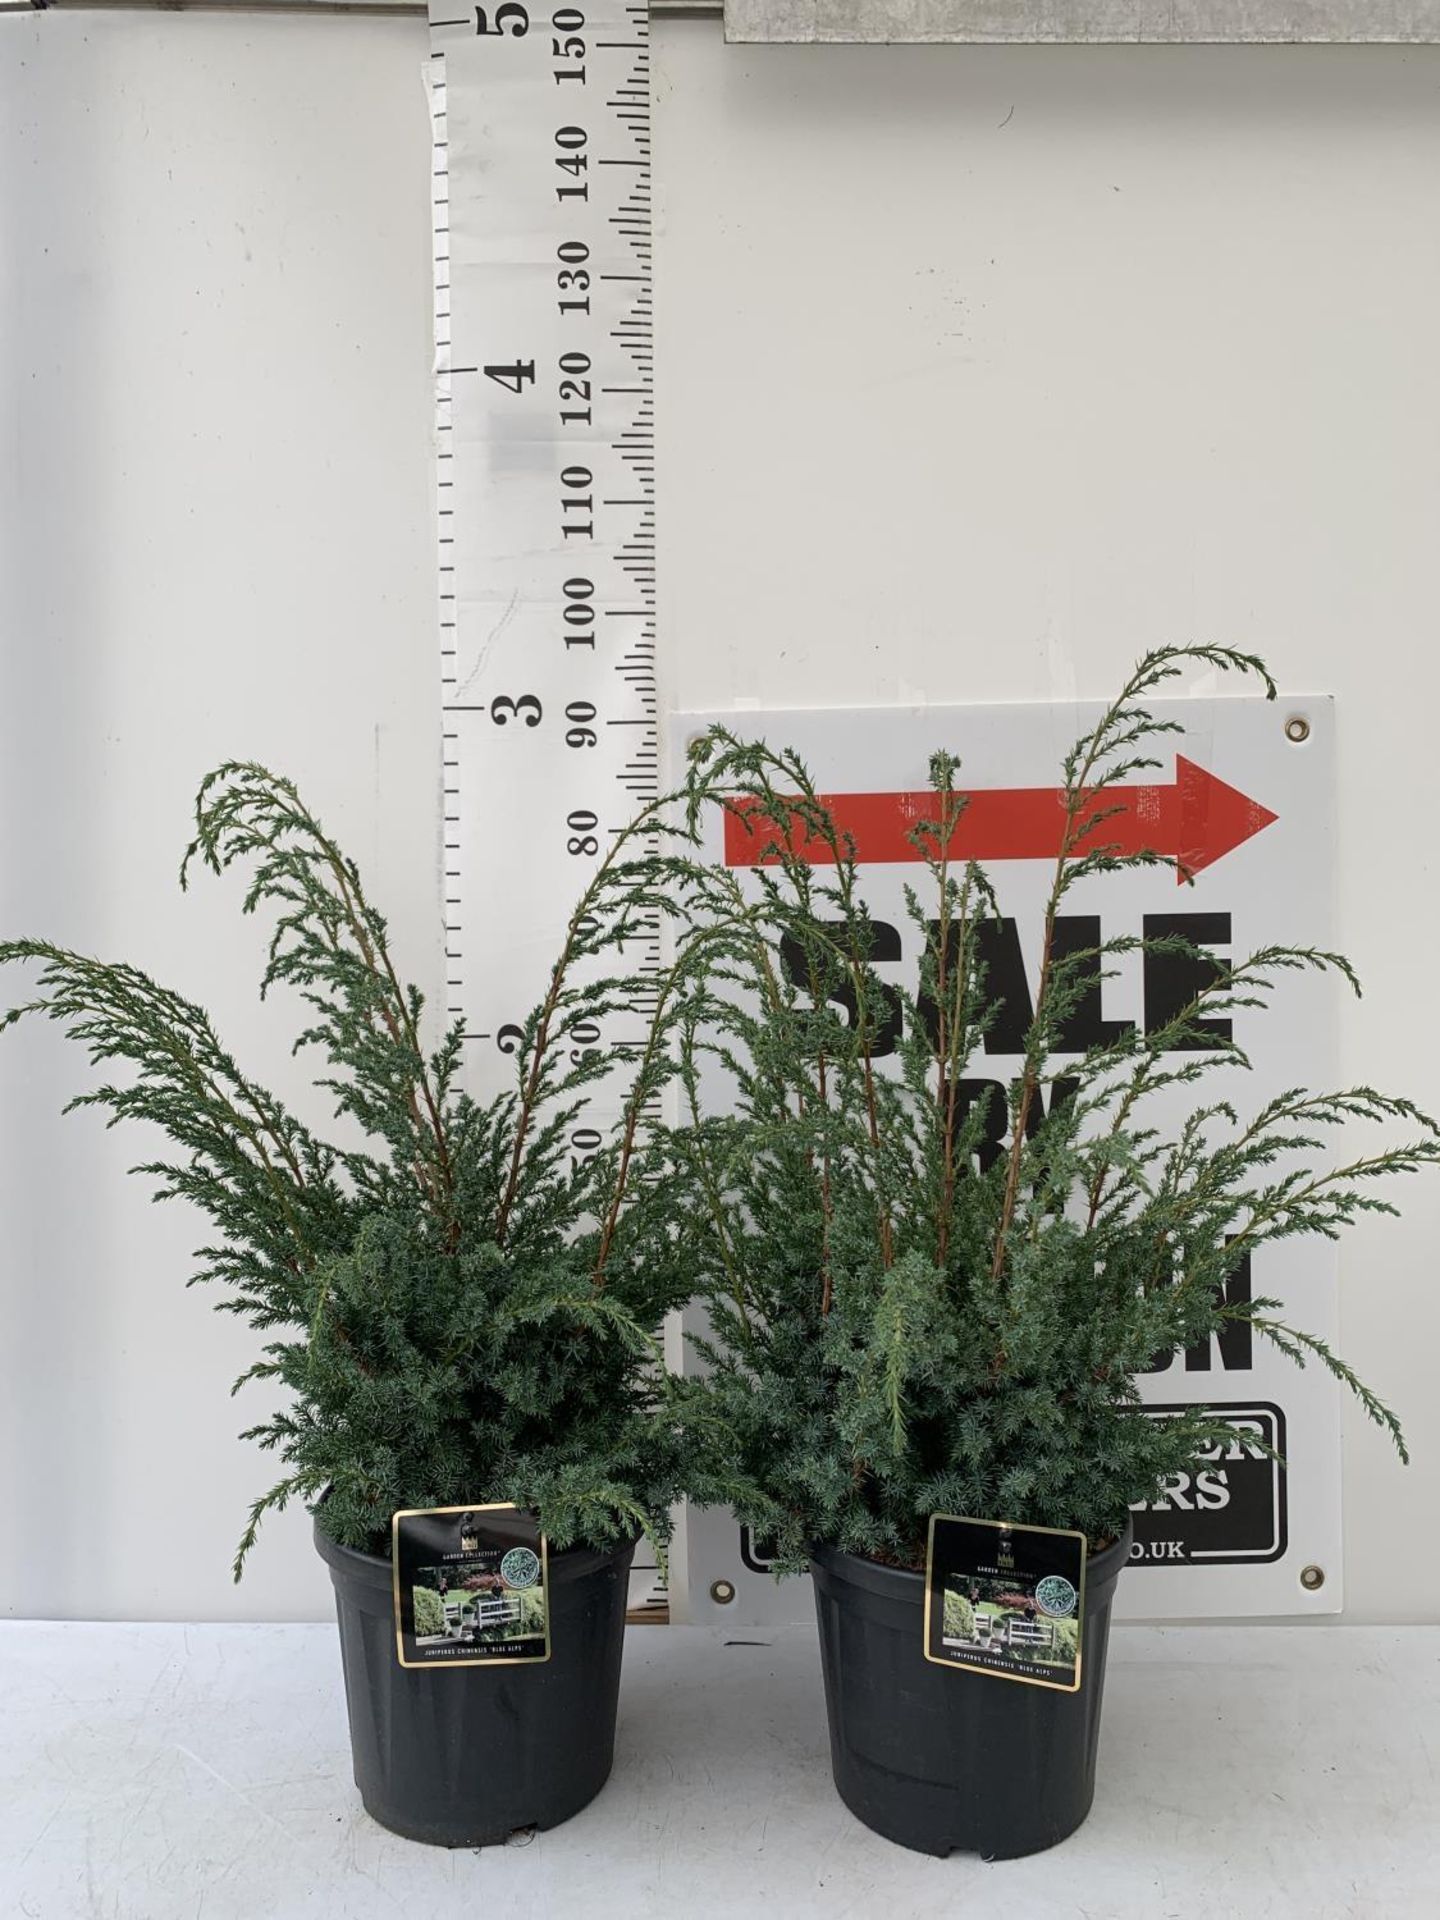 TWO JUNIPERUS CHINENSIS 'BLUE ALPS' IN 7 LTR POTS APPROX 1 METRE IN HEIGHT PLUS VAT TO BE SOLD FOR - Image 2 of 10